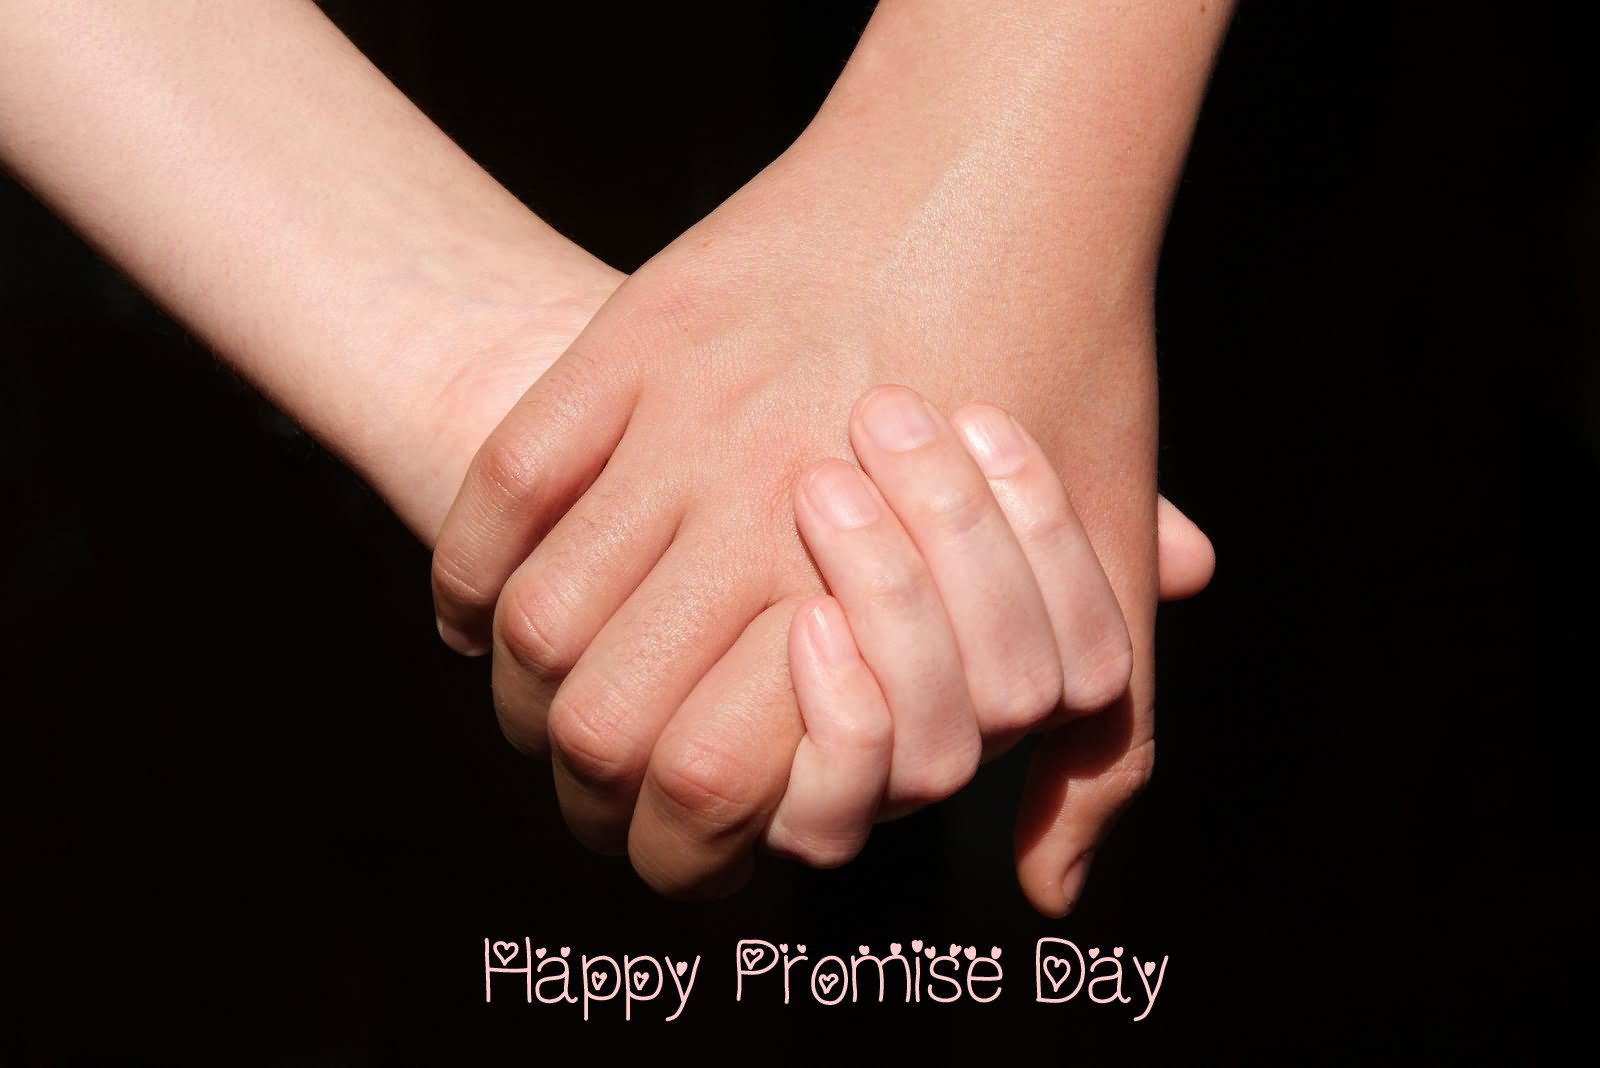 Happy Promise Day Hands In Hands Picture